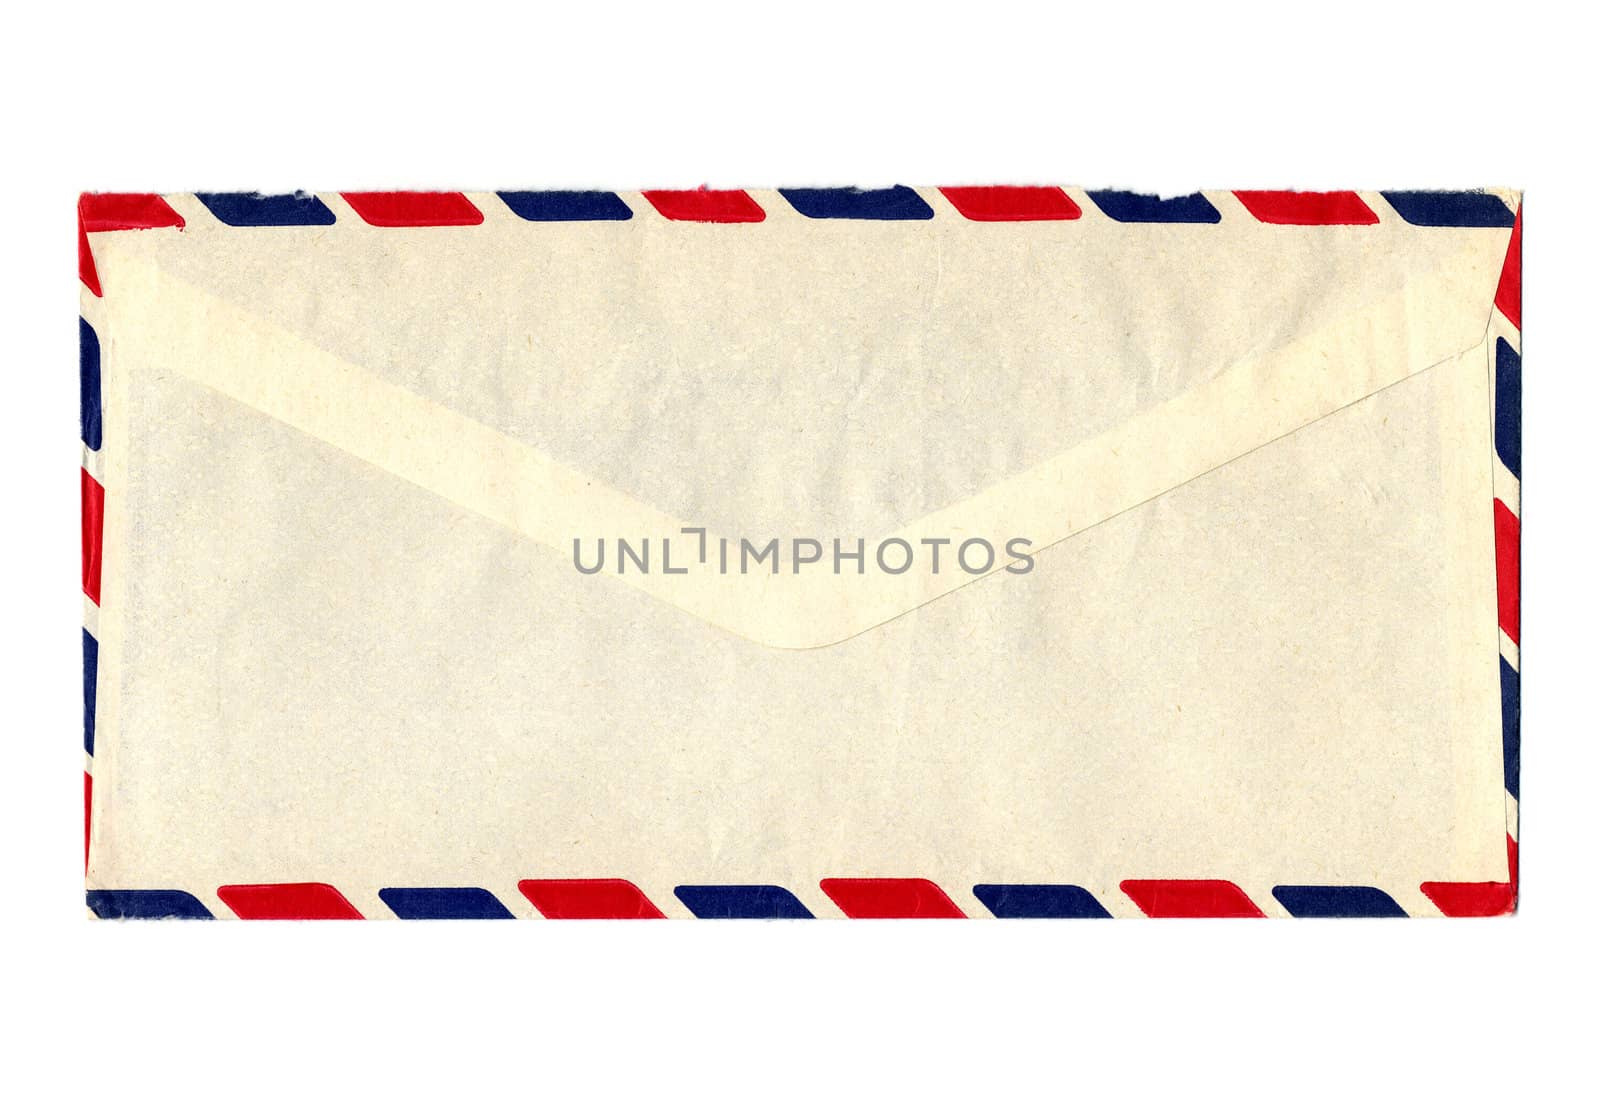 Airmail letter envelope isolated over white